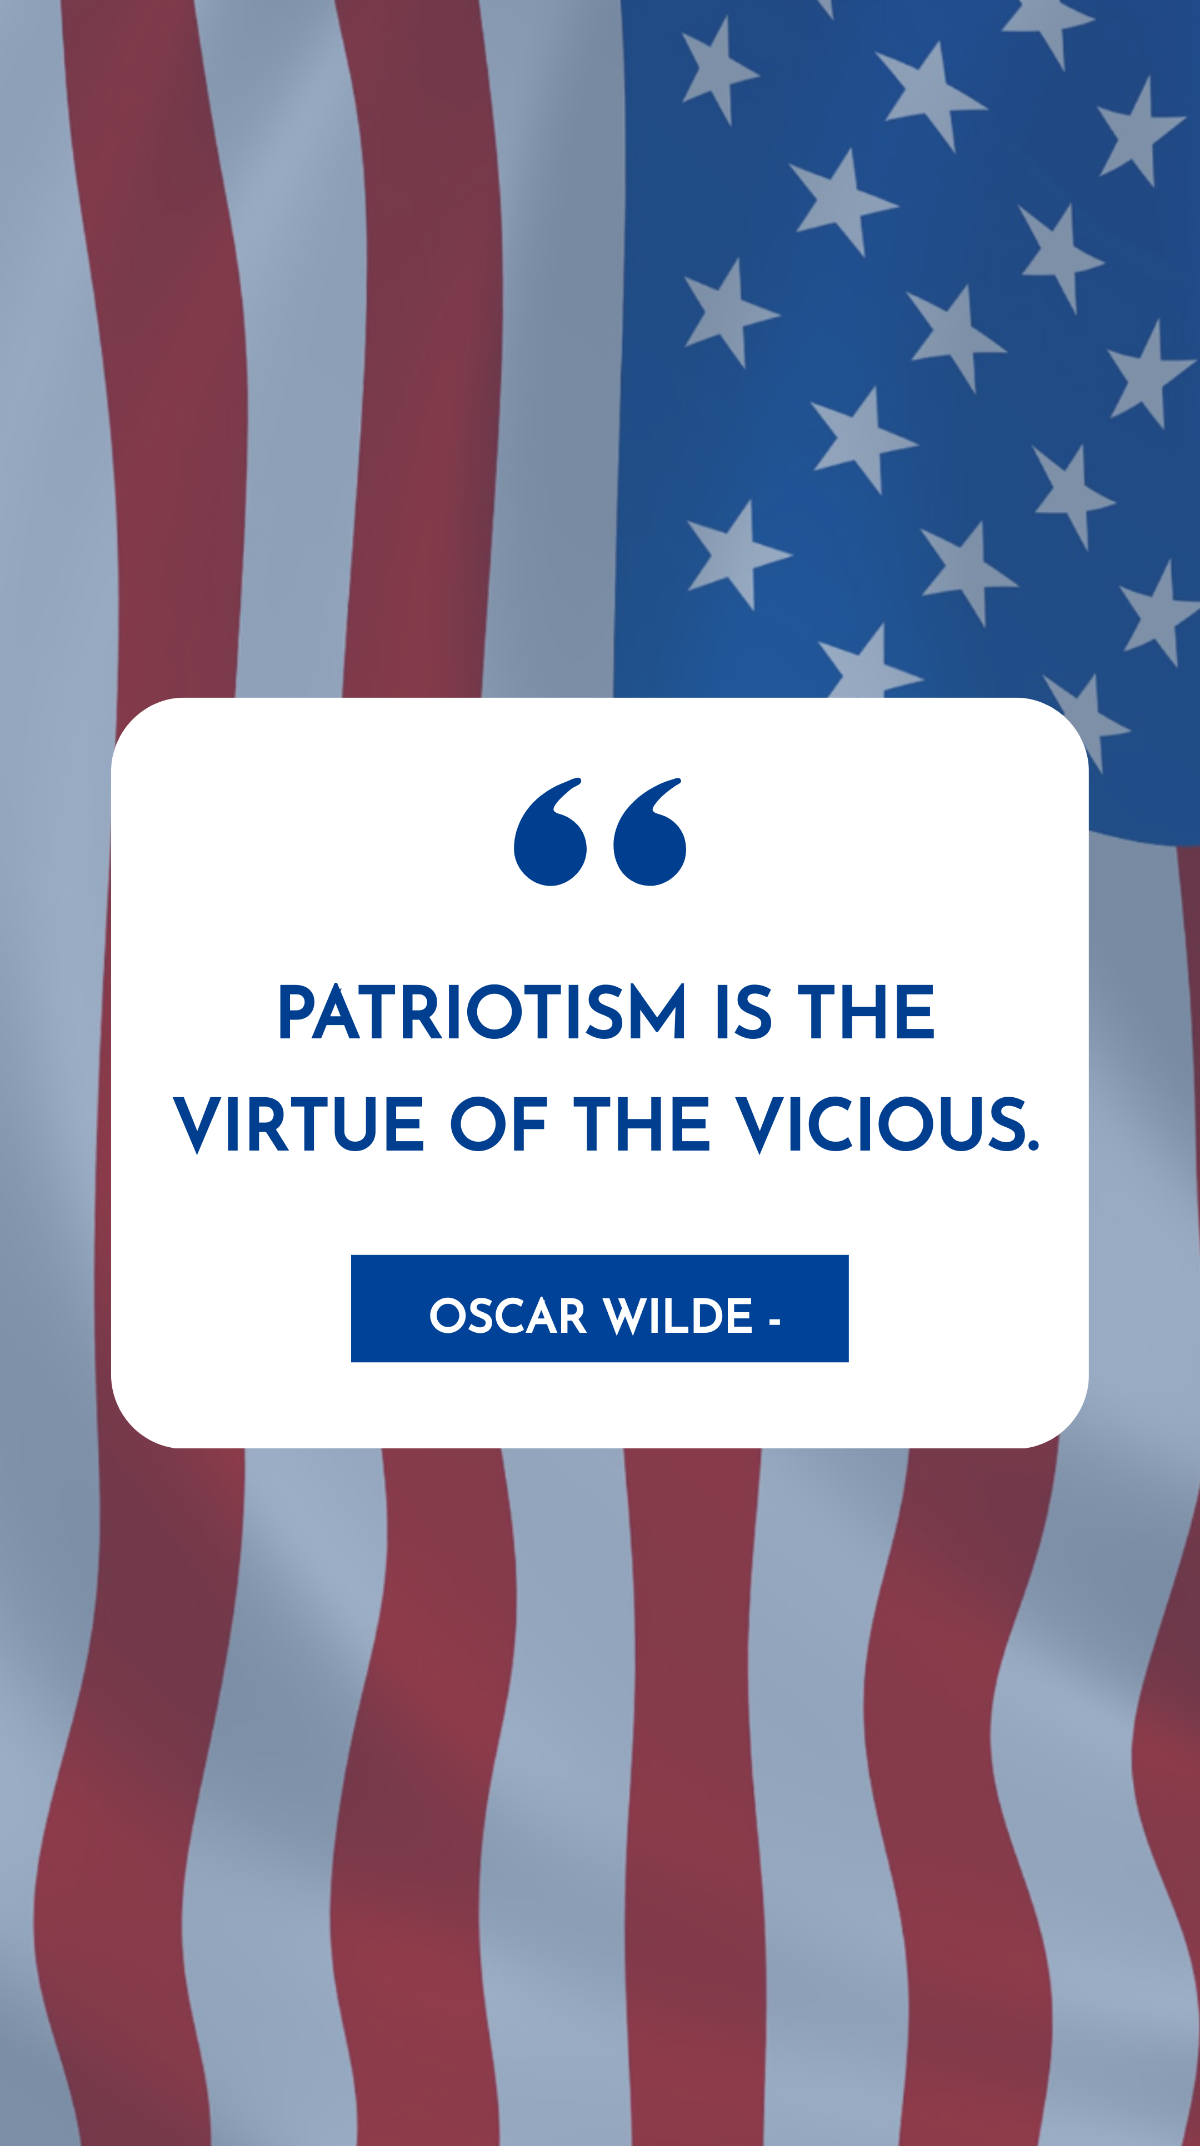 Oscar Wilde - Patriotism is the virtue of the vicious. Template